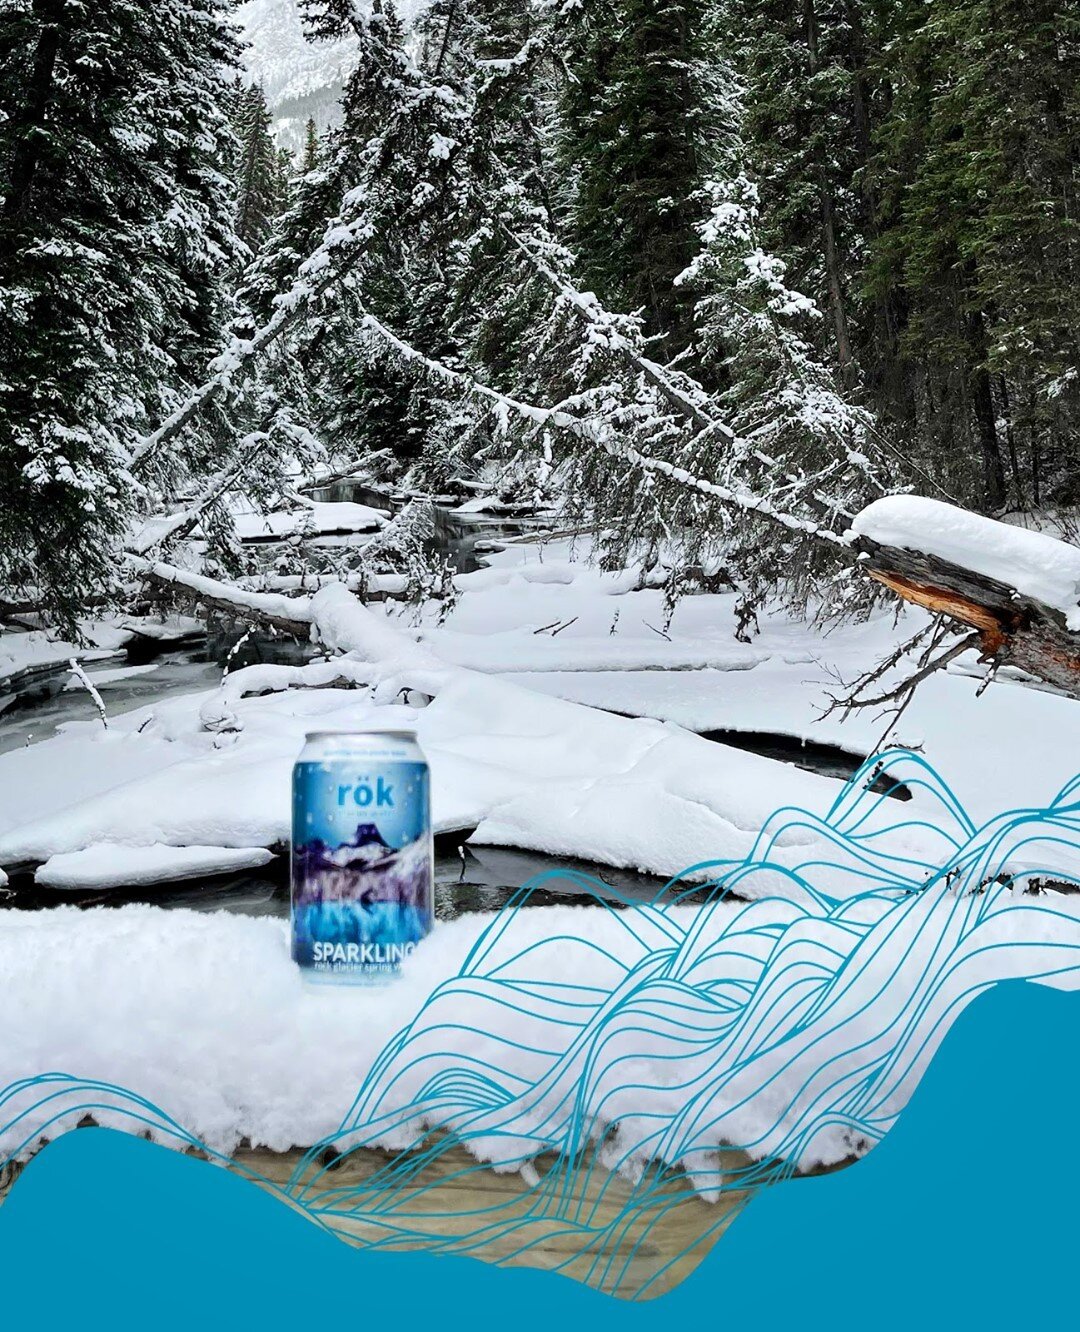 We could all use a little extra magic some days, get yours in a can of r&ouml;k Glacier Water.

Seek to enjoy the little things in life, with r&ouml;k Glacier Water canned right here in the Canadian Rocky Mountains.

#FlowsHereNotFlownHere #CANadian 